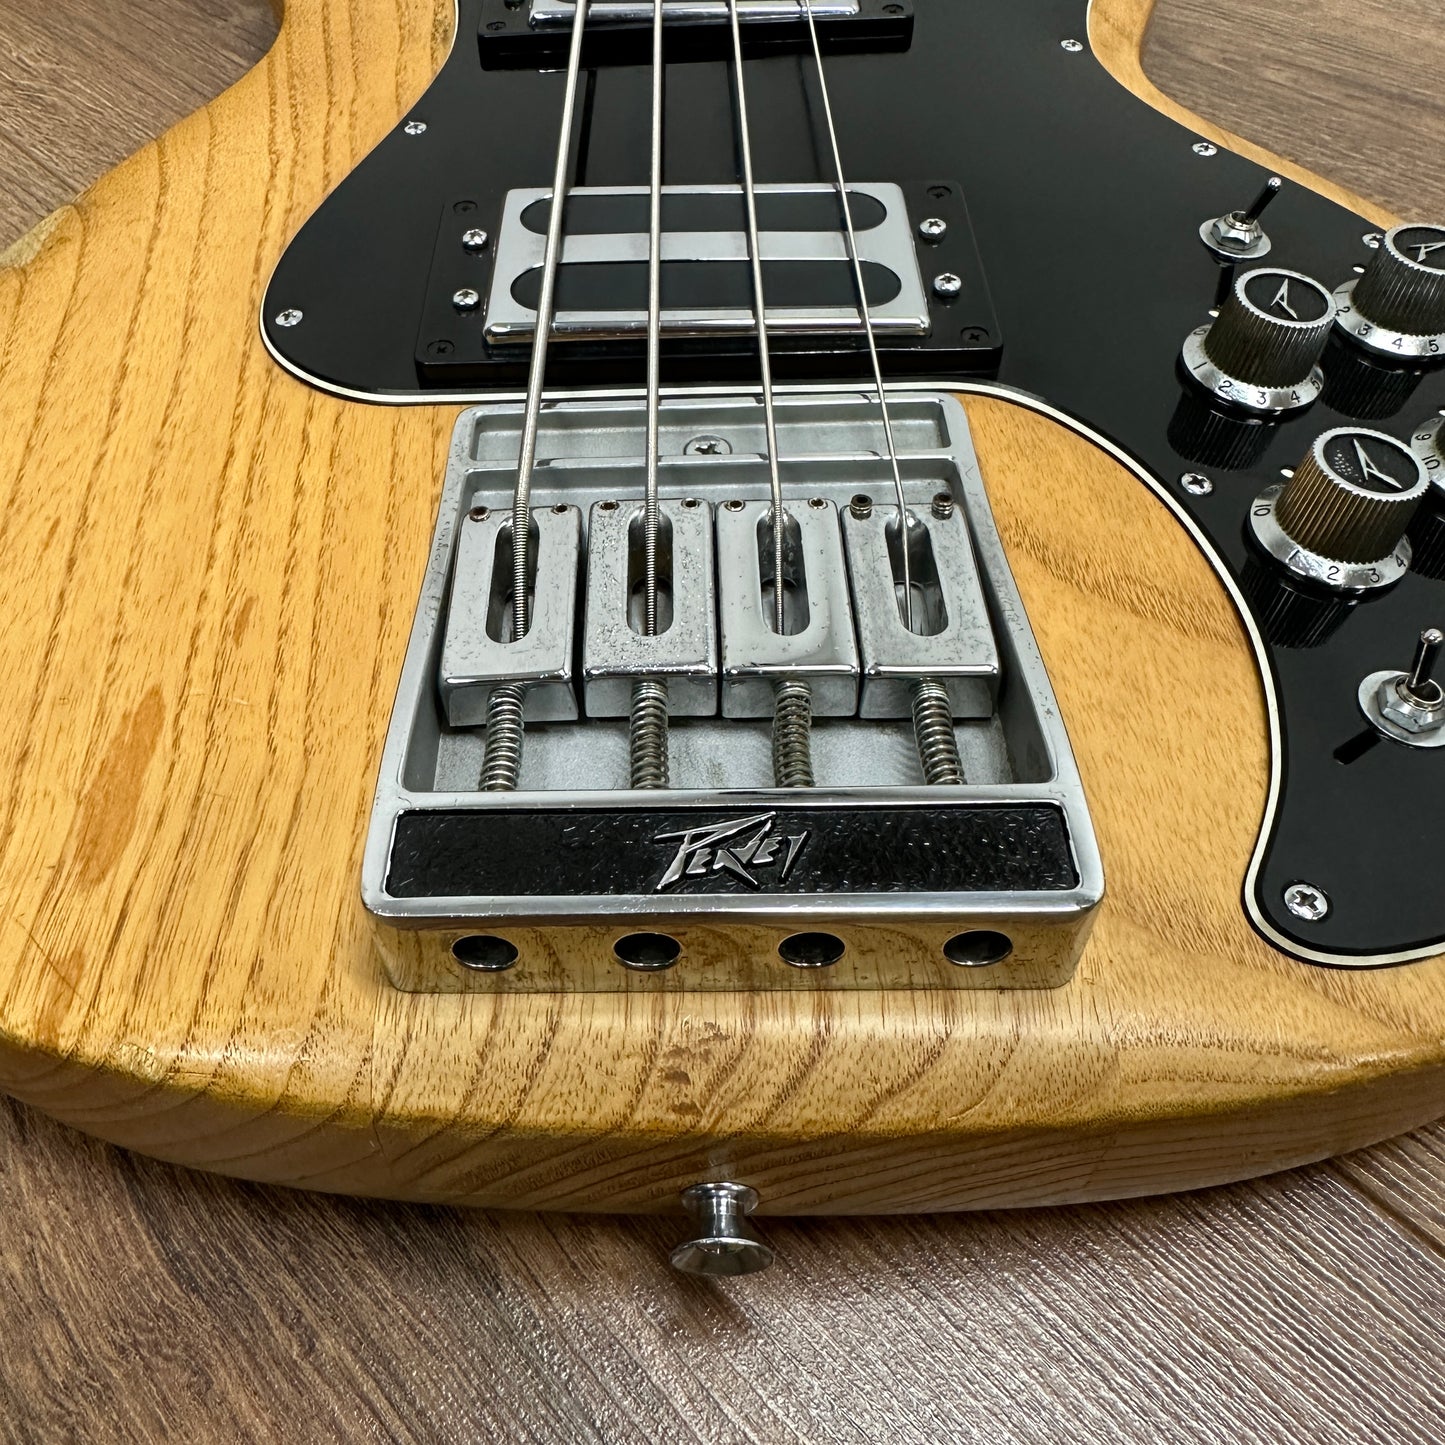 Pre-Owned Peavey T-40 Bass - Natural - 1979